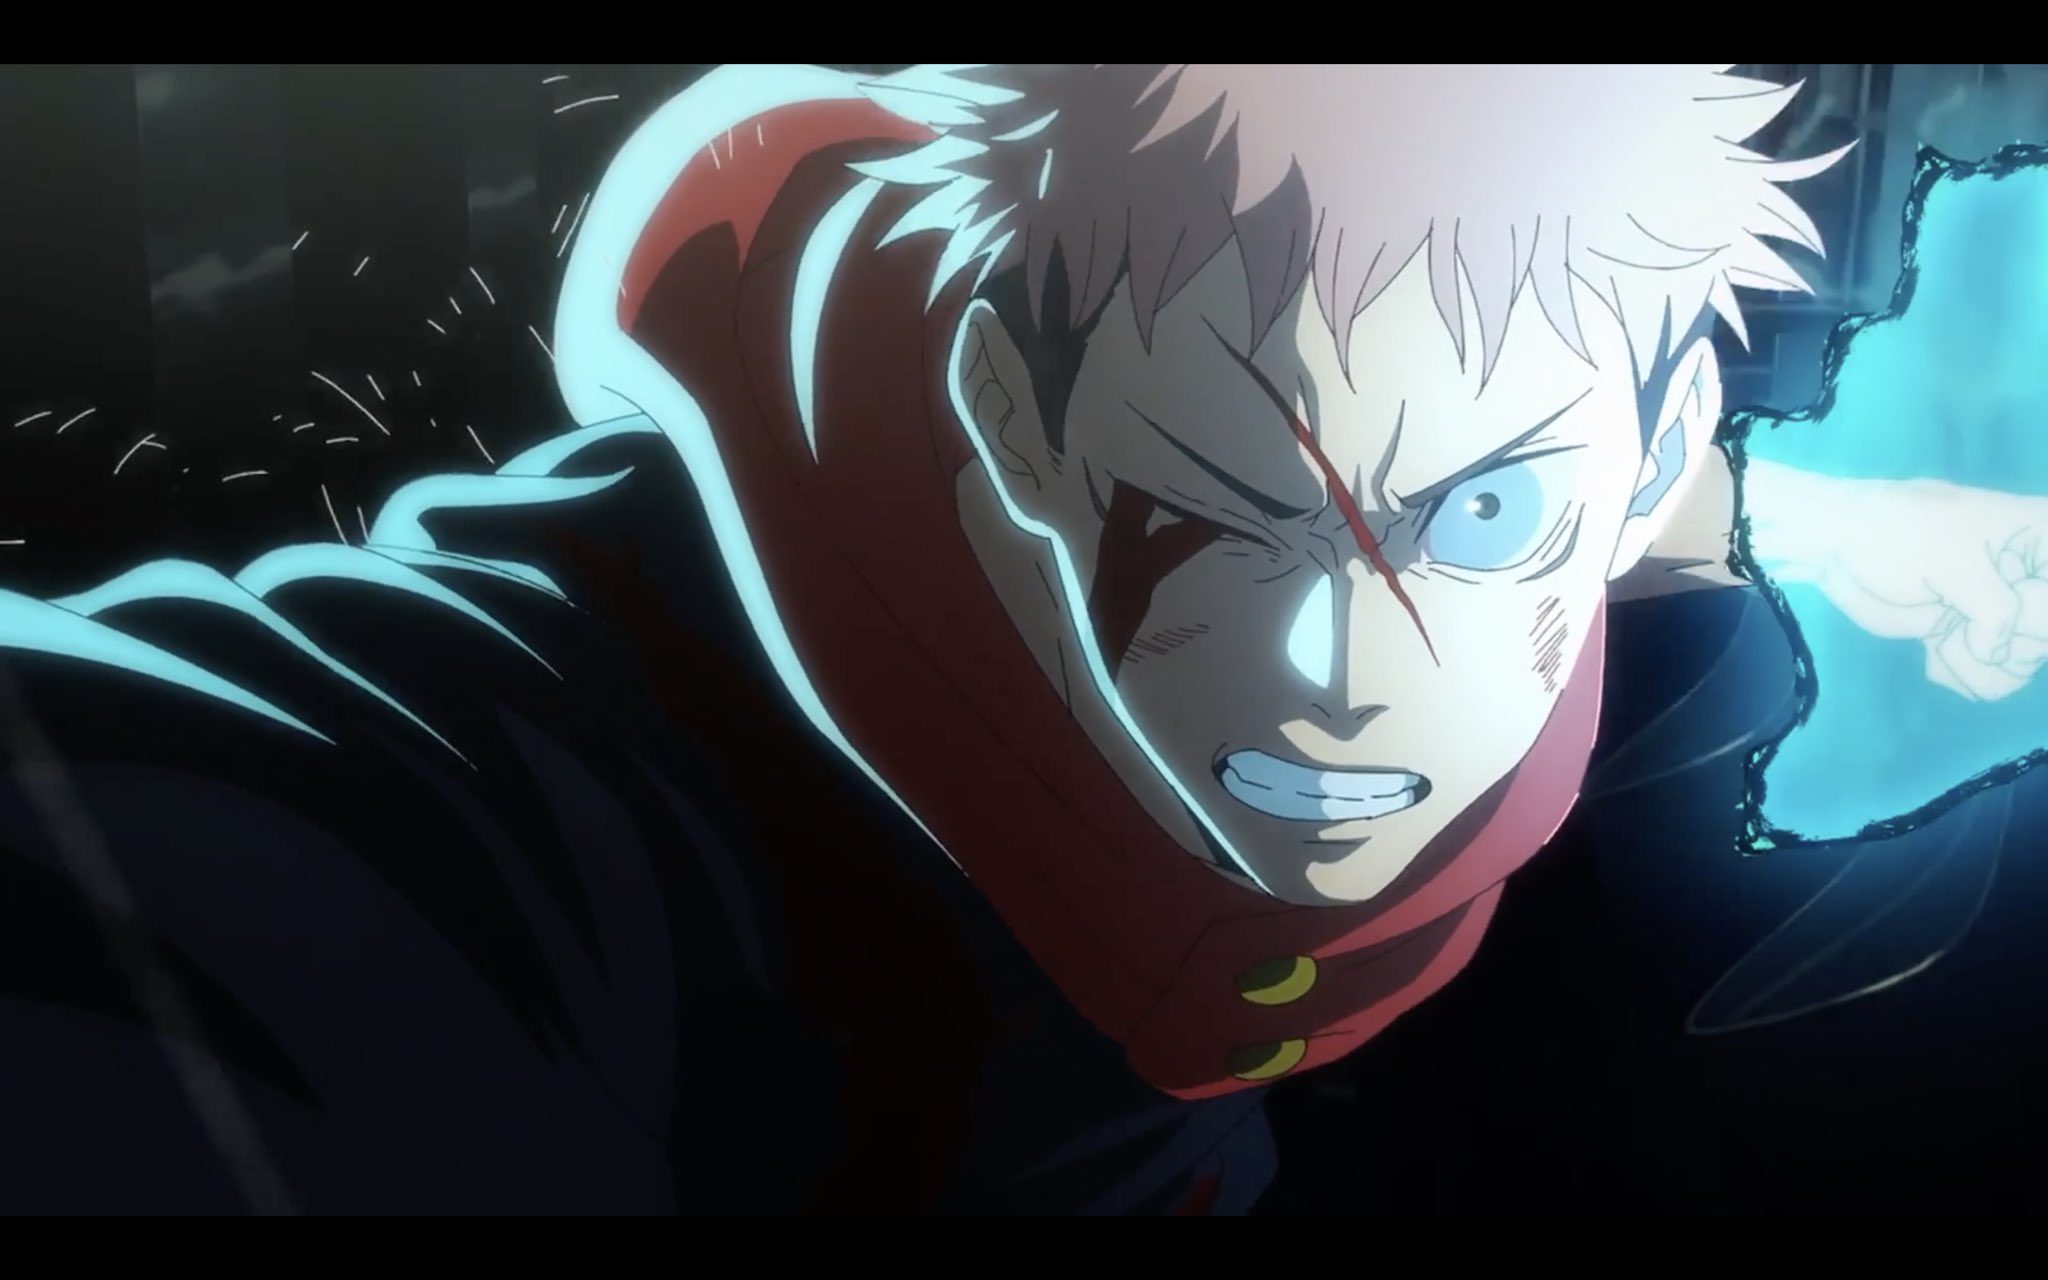 Throughout Heaven and Earth I Alone am the Honored One【天上天下唯我独尊I】Jujutsu  Kaisen Season 2 Episode 4 